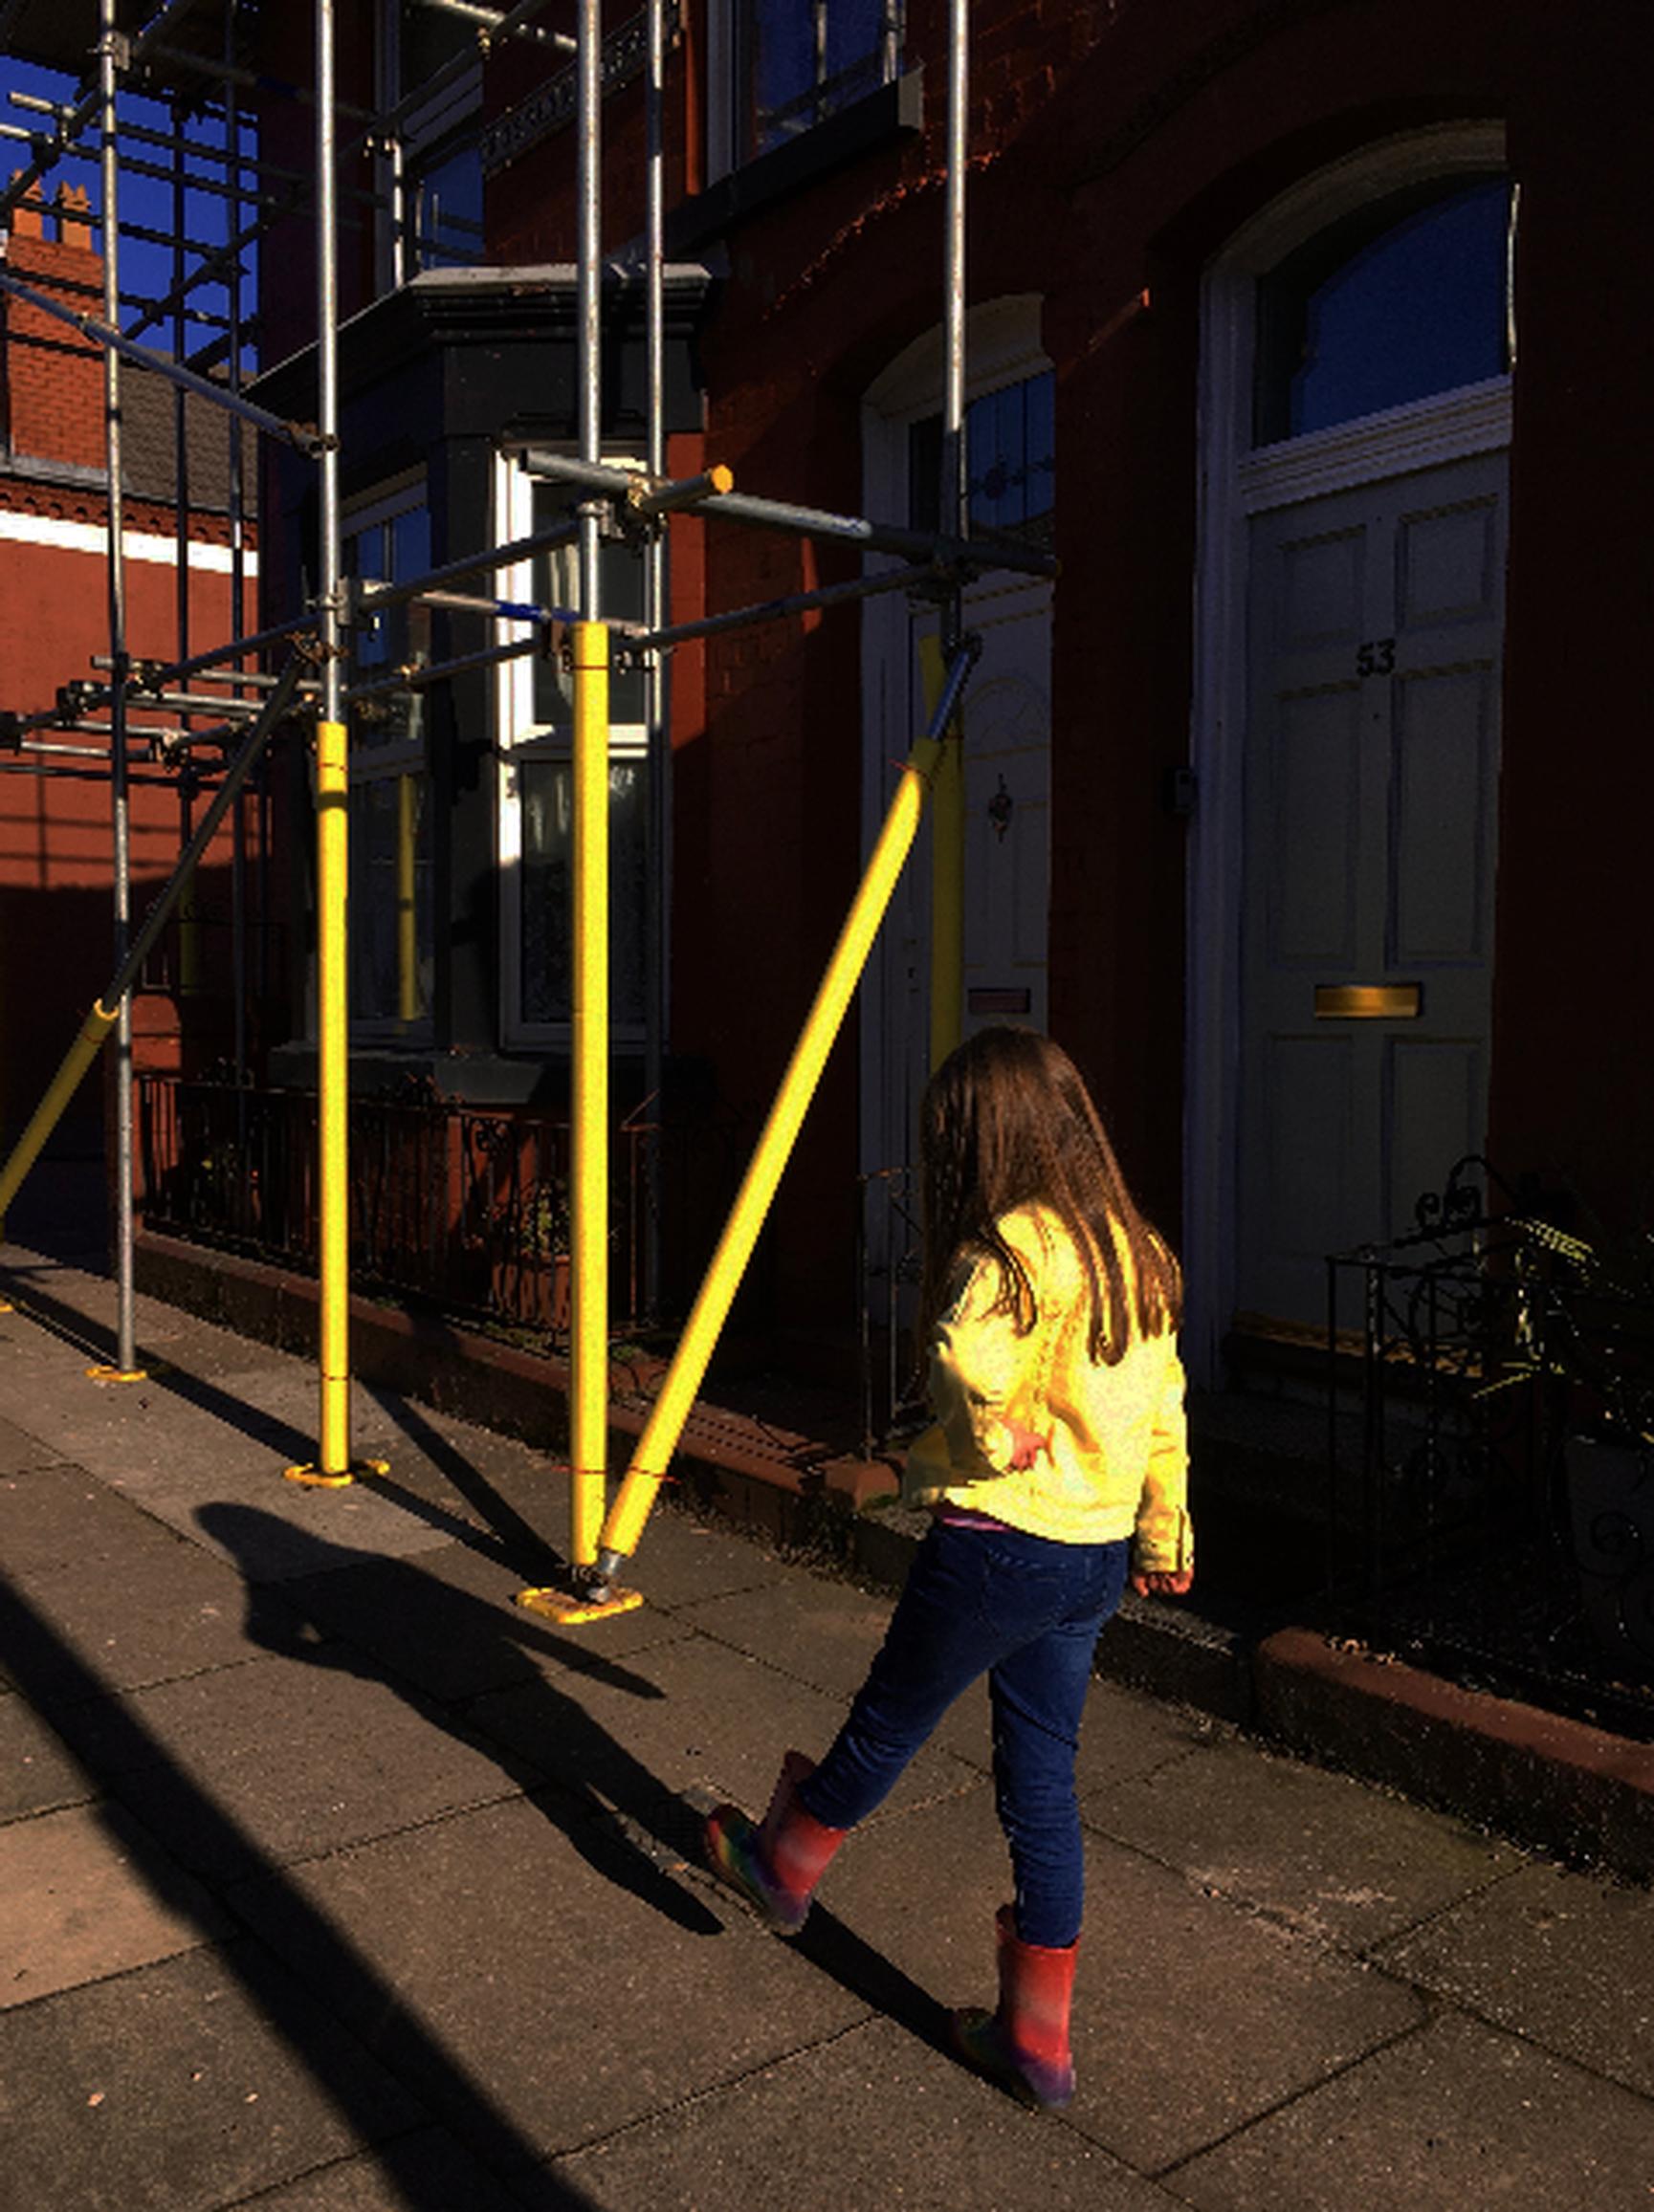 Jemma Street, Liverpool (Yellow week winner): “Taking my six-year-old daughter for her daily walk around the local neighbourhood during lockdown has been a real lifesaver for us, both mentally and physically. We have always walked to our local shops and parks, as well as to school every day, but somehow getting outdoors has felt much more precious since the pandemic began. Seldom a day goes by when we don`t bump into a friend on our walks. These brief points of contact, even a quick wave or a `hello` from the other side of a road, have really helped keep our spirits up and lessened the inevitable feelings of isolation brought on by lockdown.”